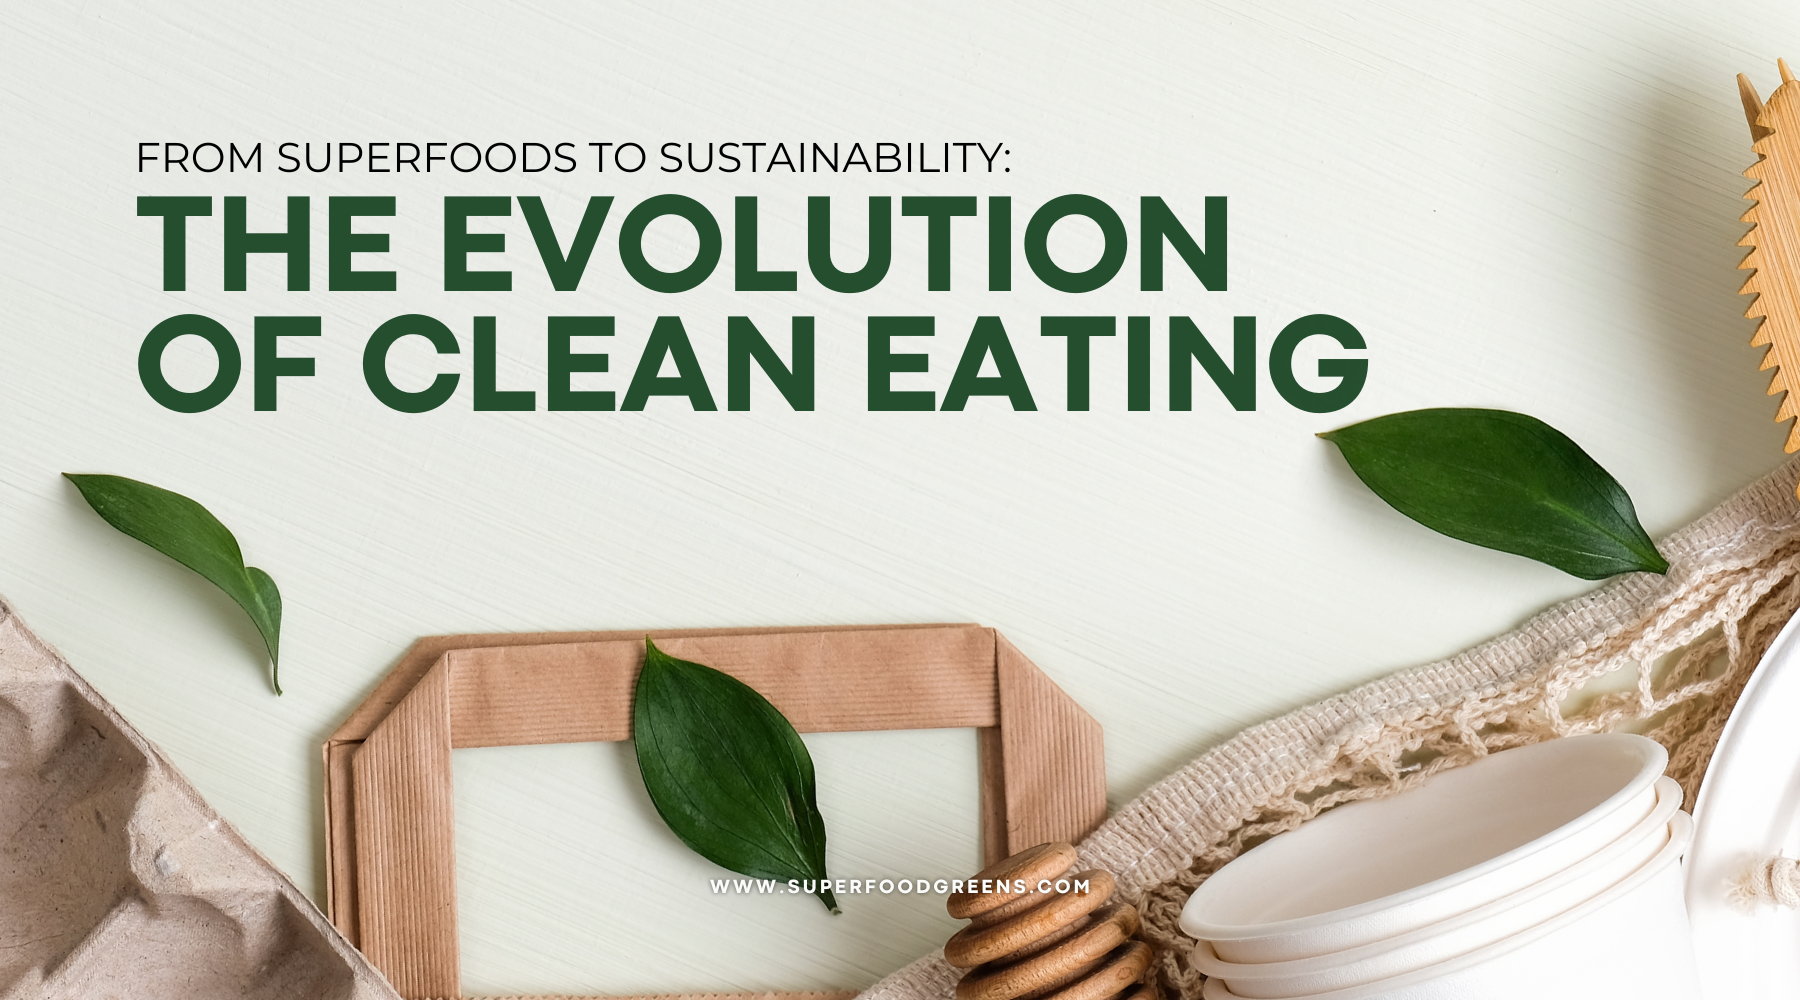 From Superfood Greens to Sustainability: The Evolution of Clean Eating | Superfood Greens